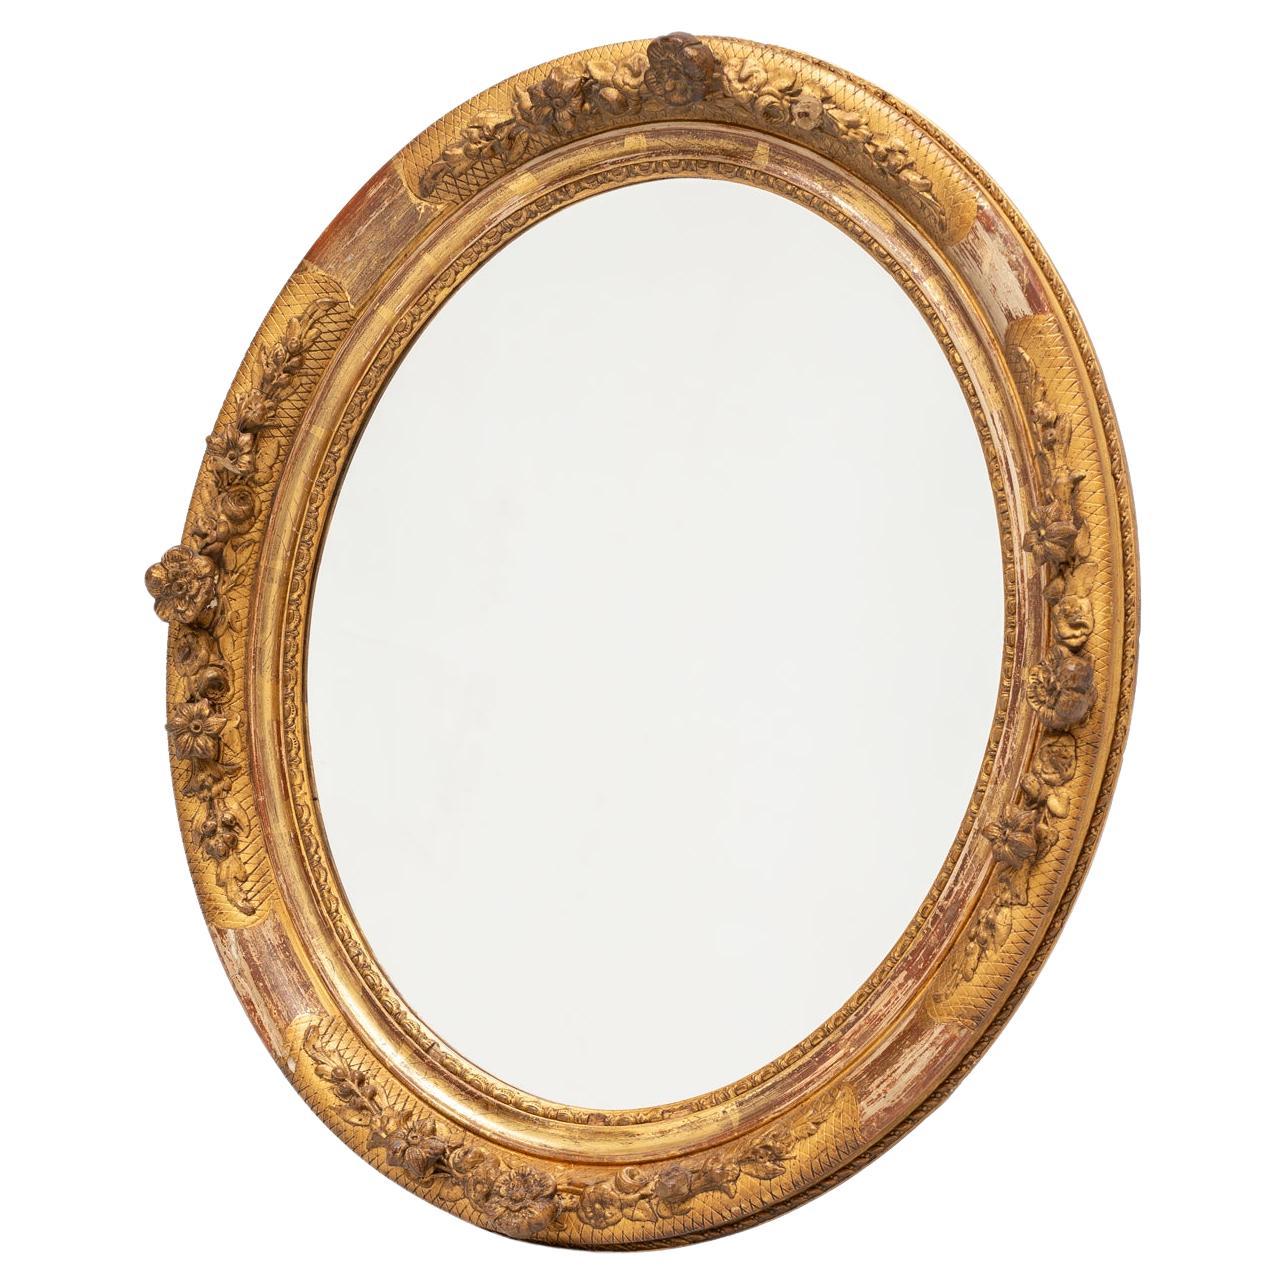 18th Century Romantic Mirror in Carved and Gilded Wood